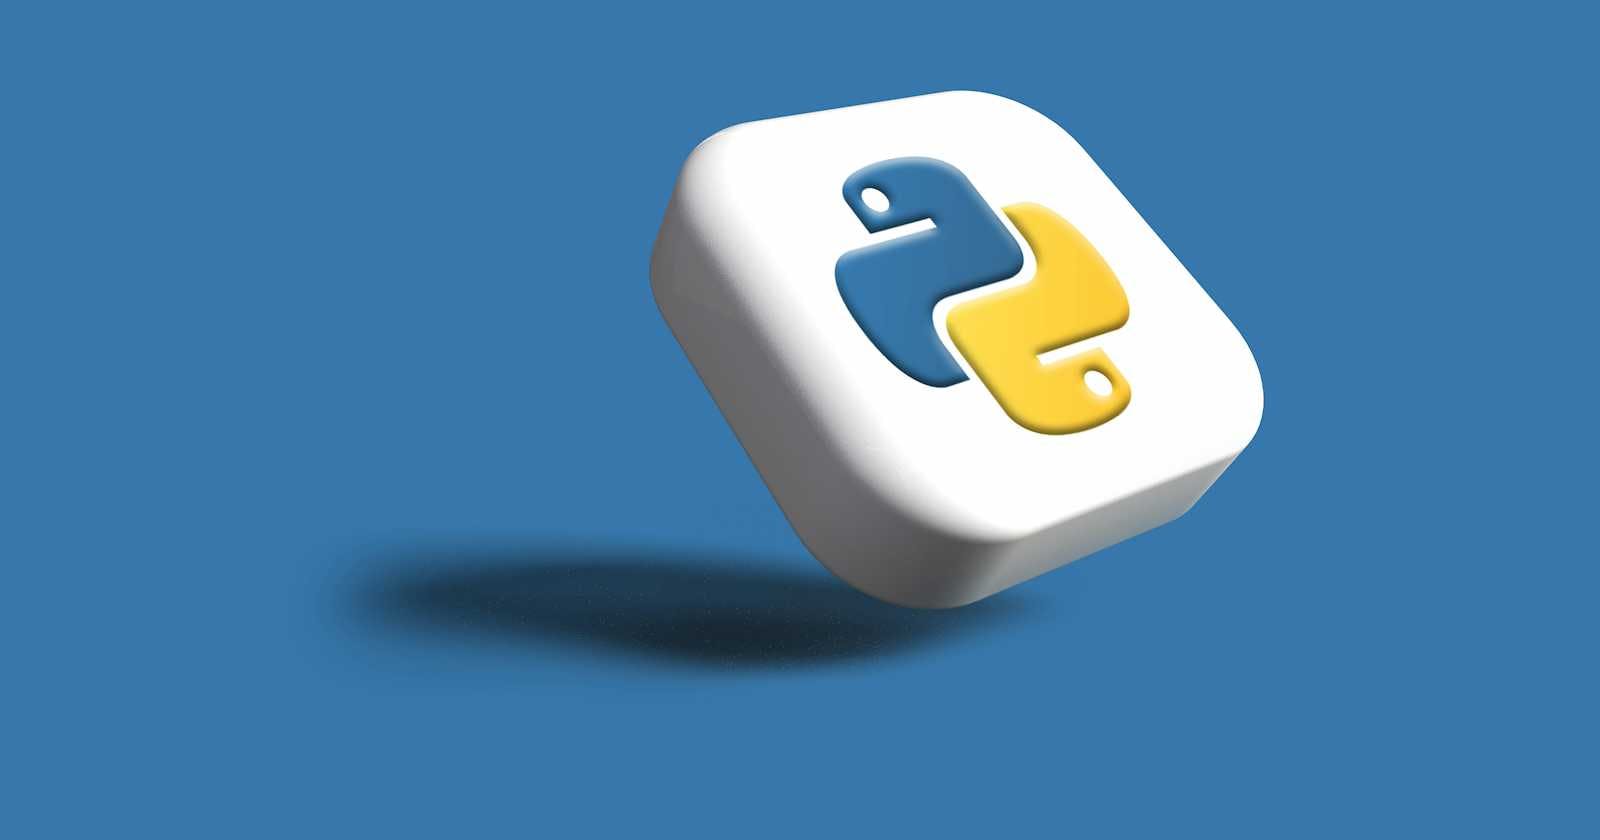 Make working with Python easy with these 5 tricks